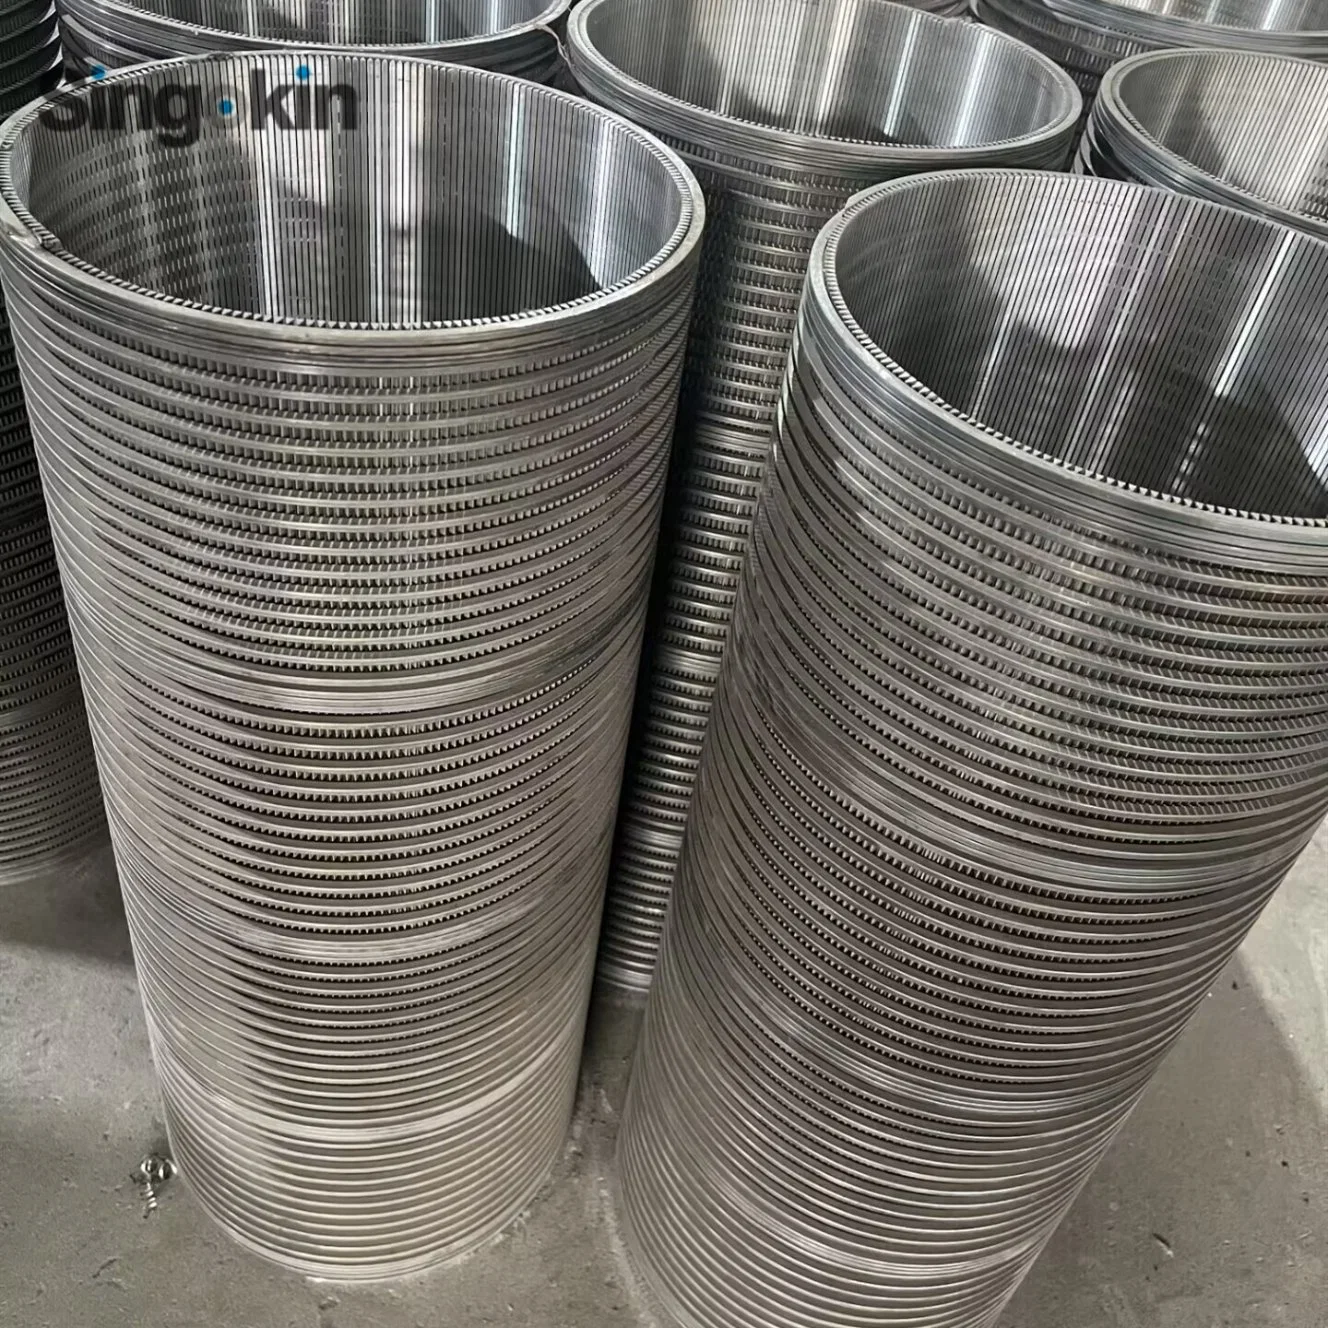 316stainless Steel Wedge Wire Type Rotary Drum Screen Filter Strainer for Wastewater Treatment